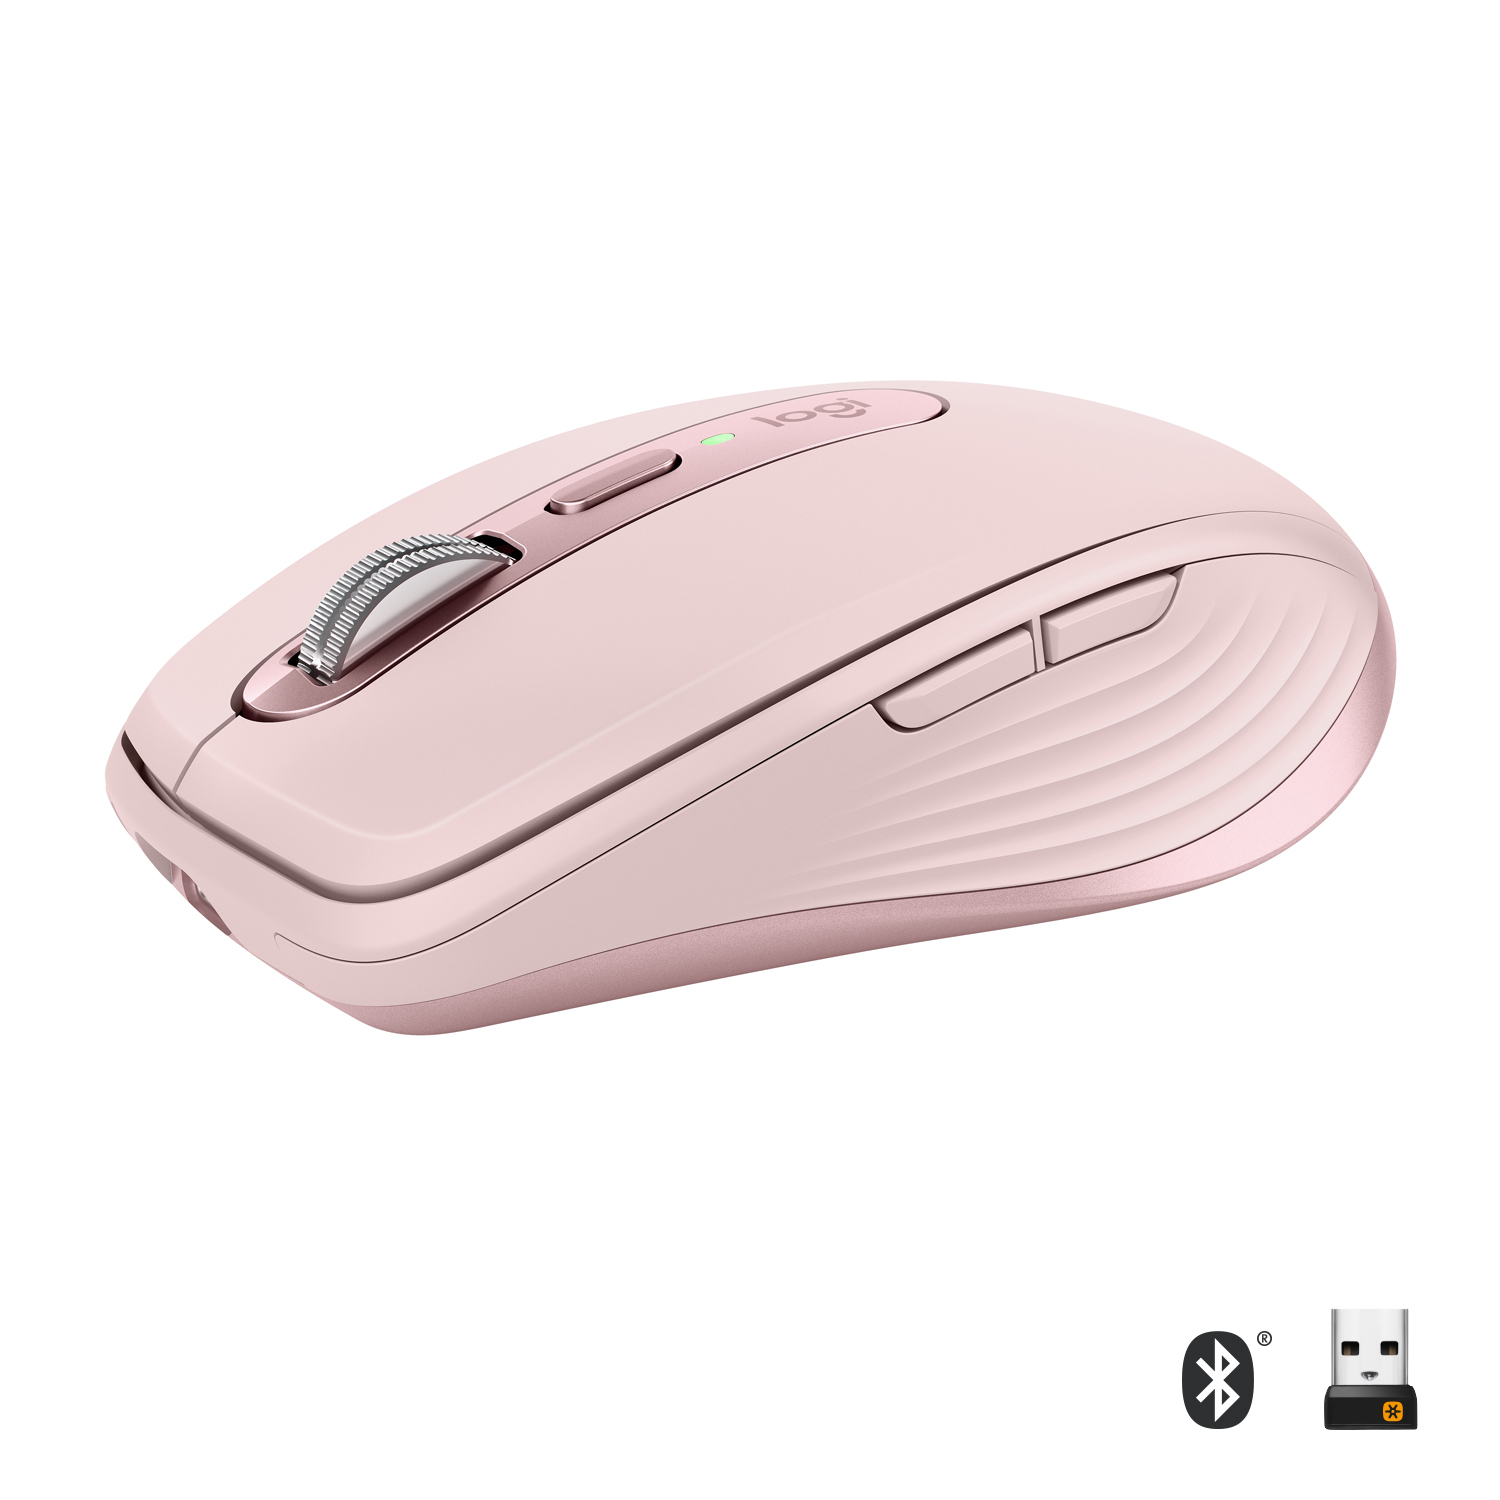 Logitech MX Anywhere 3 - Mouse - Laser - 6 Buttons - Wireless - Bluetooth, 2.4 GHz - USB Wireless Receiver - Rose 910-005990 - C2000